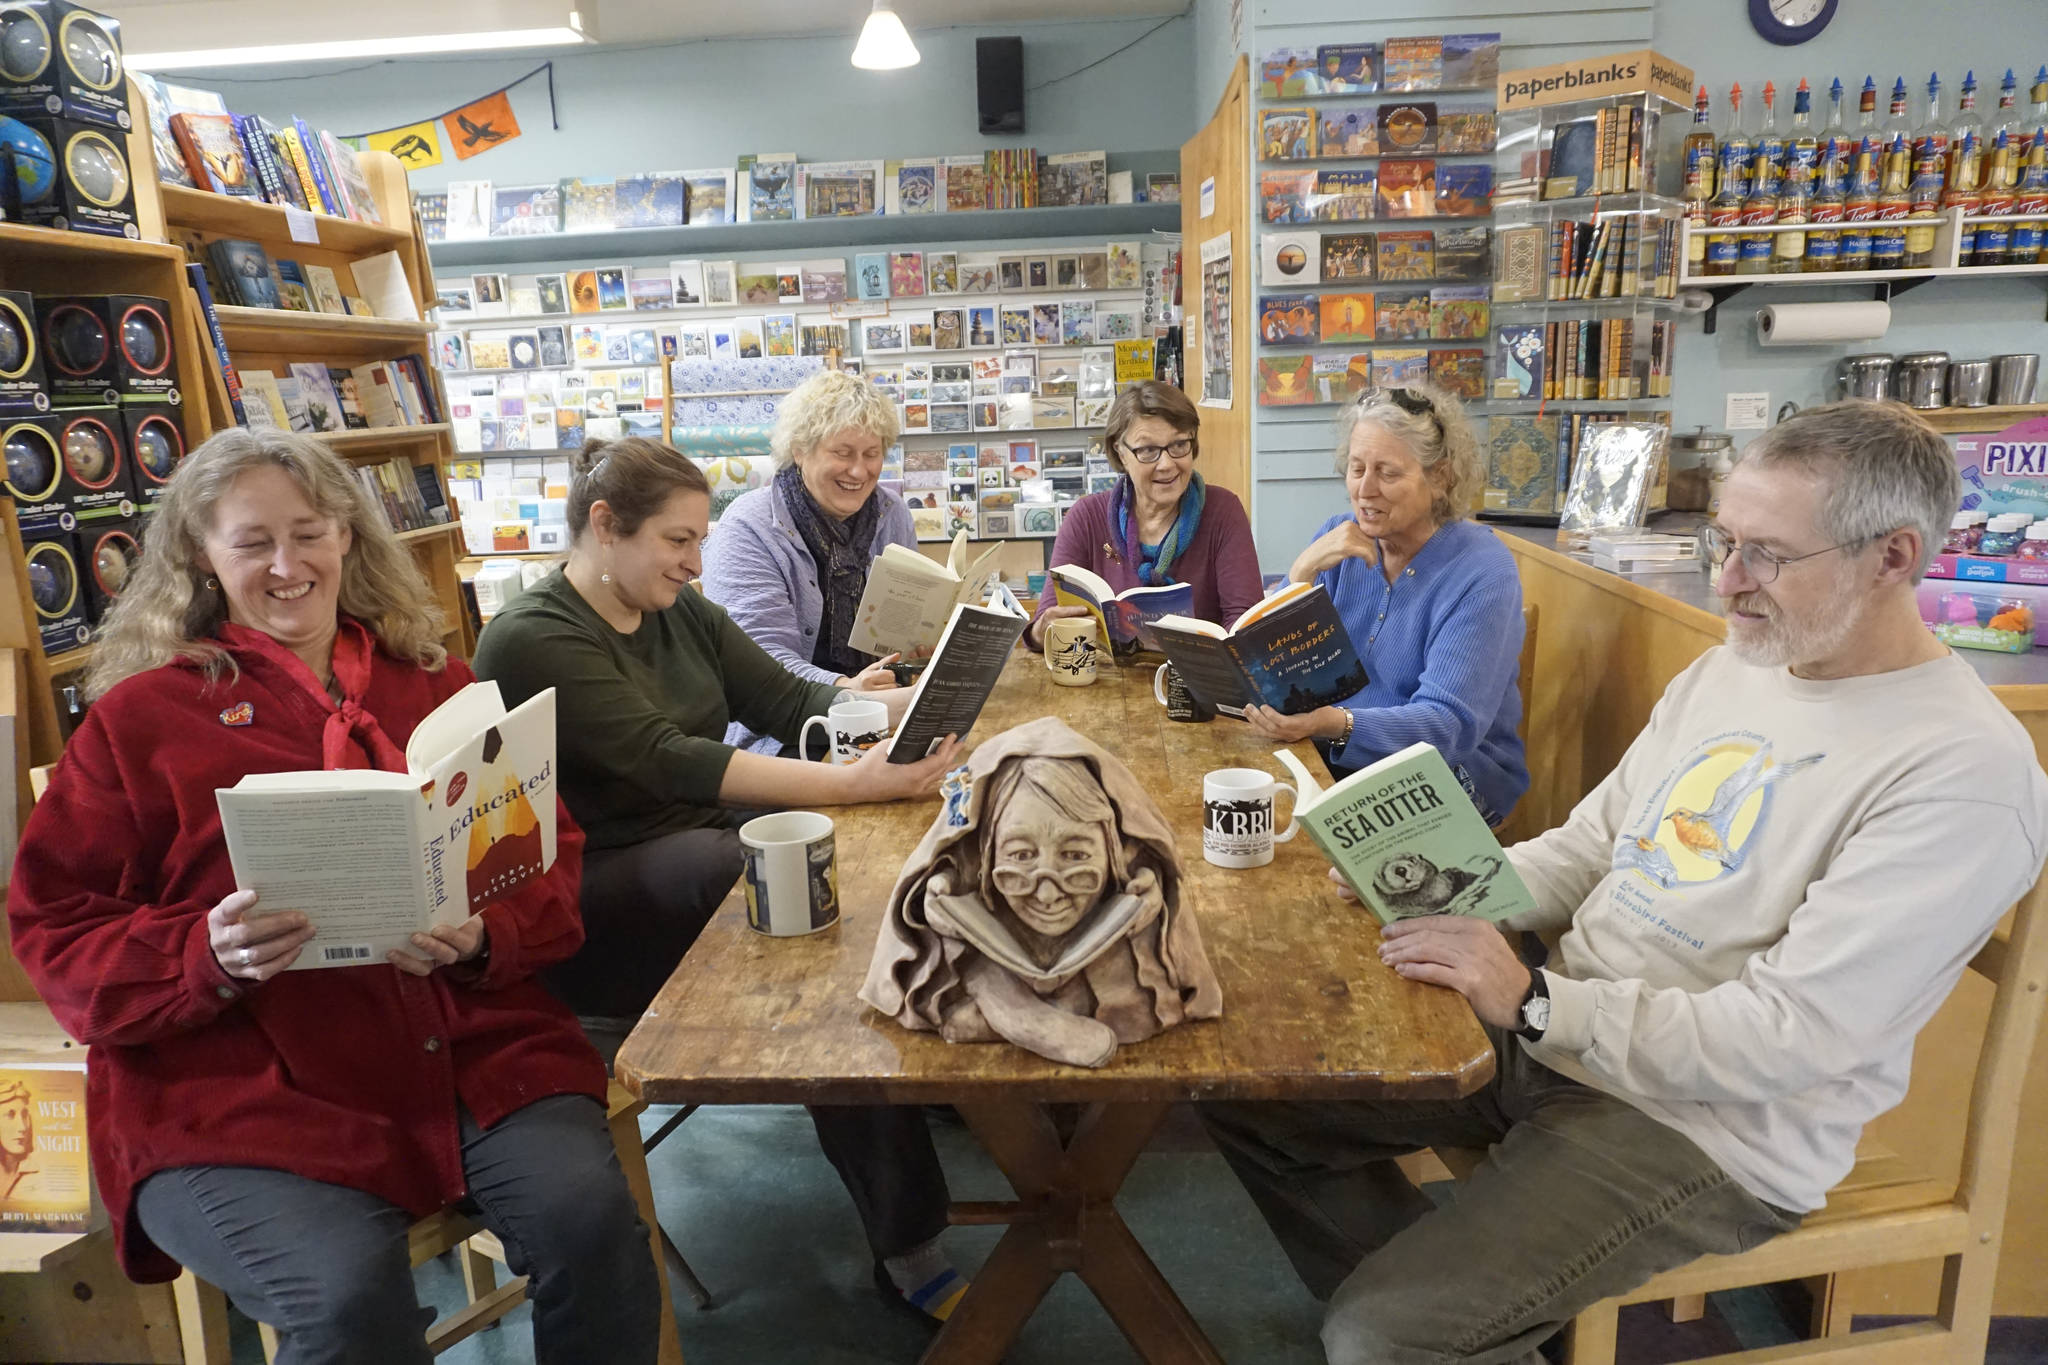 The staff and partners in the Homer Bookstore pose for a photo in the store’s cafe in Homer, Alaska, on Oct. 29, 2018. From left to right are Sue Post, partner; Jennifer Norton, staff; Jennifer Stroyeck, partner; Nancy Vait, staff; Sara Reinert, staff; and Lee Post, partner. (Homer News file photo)